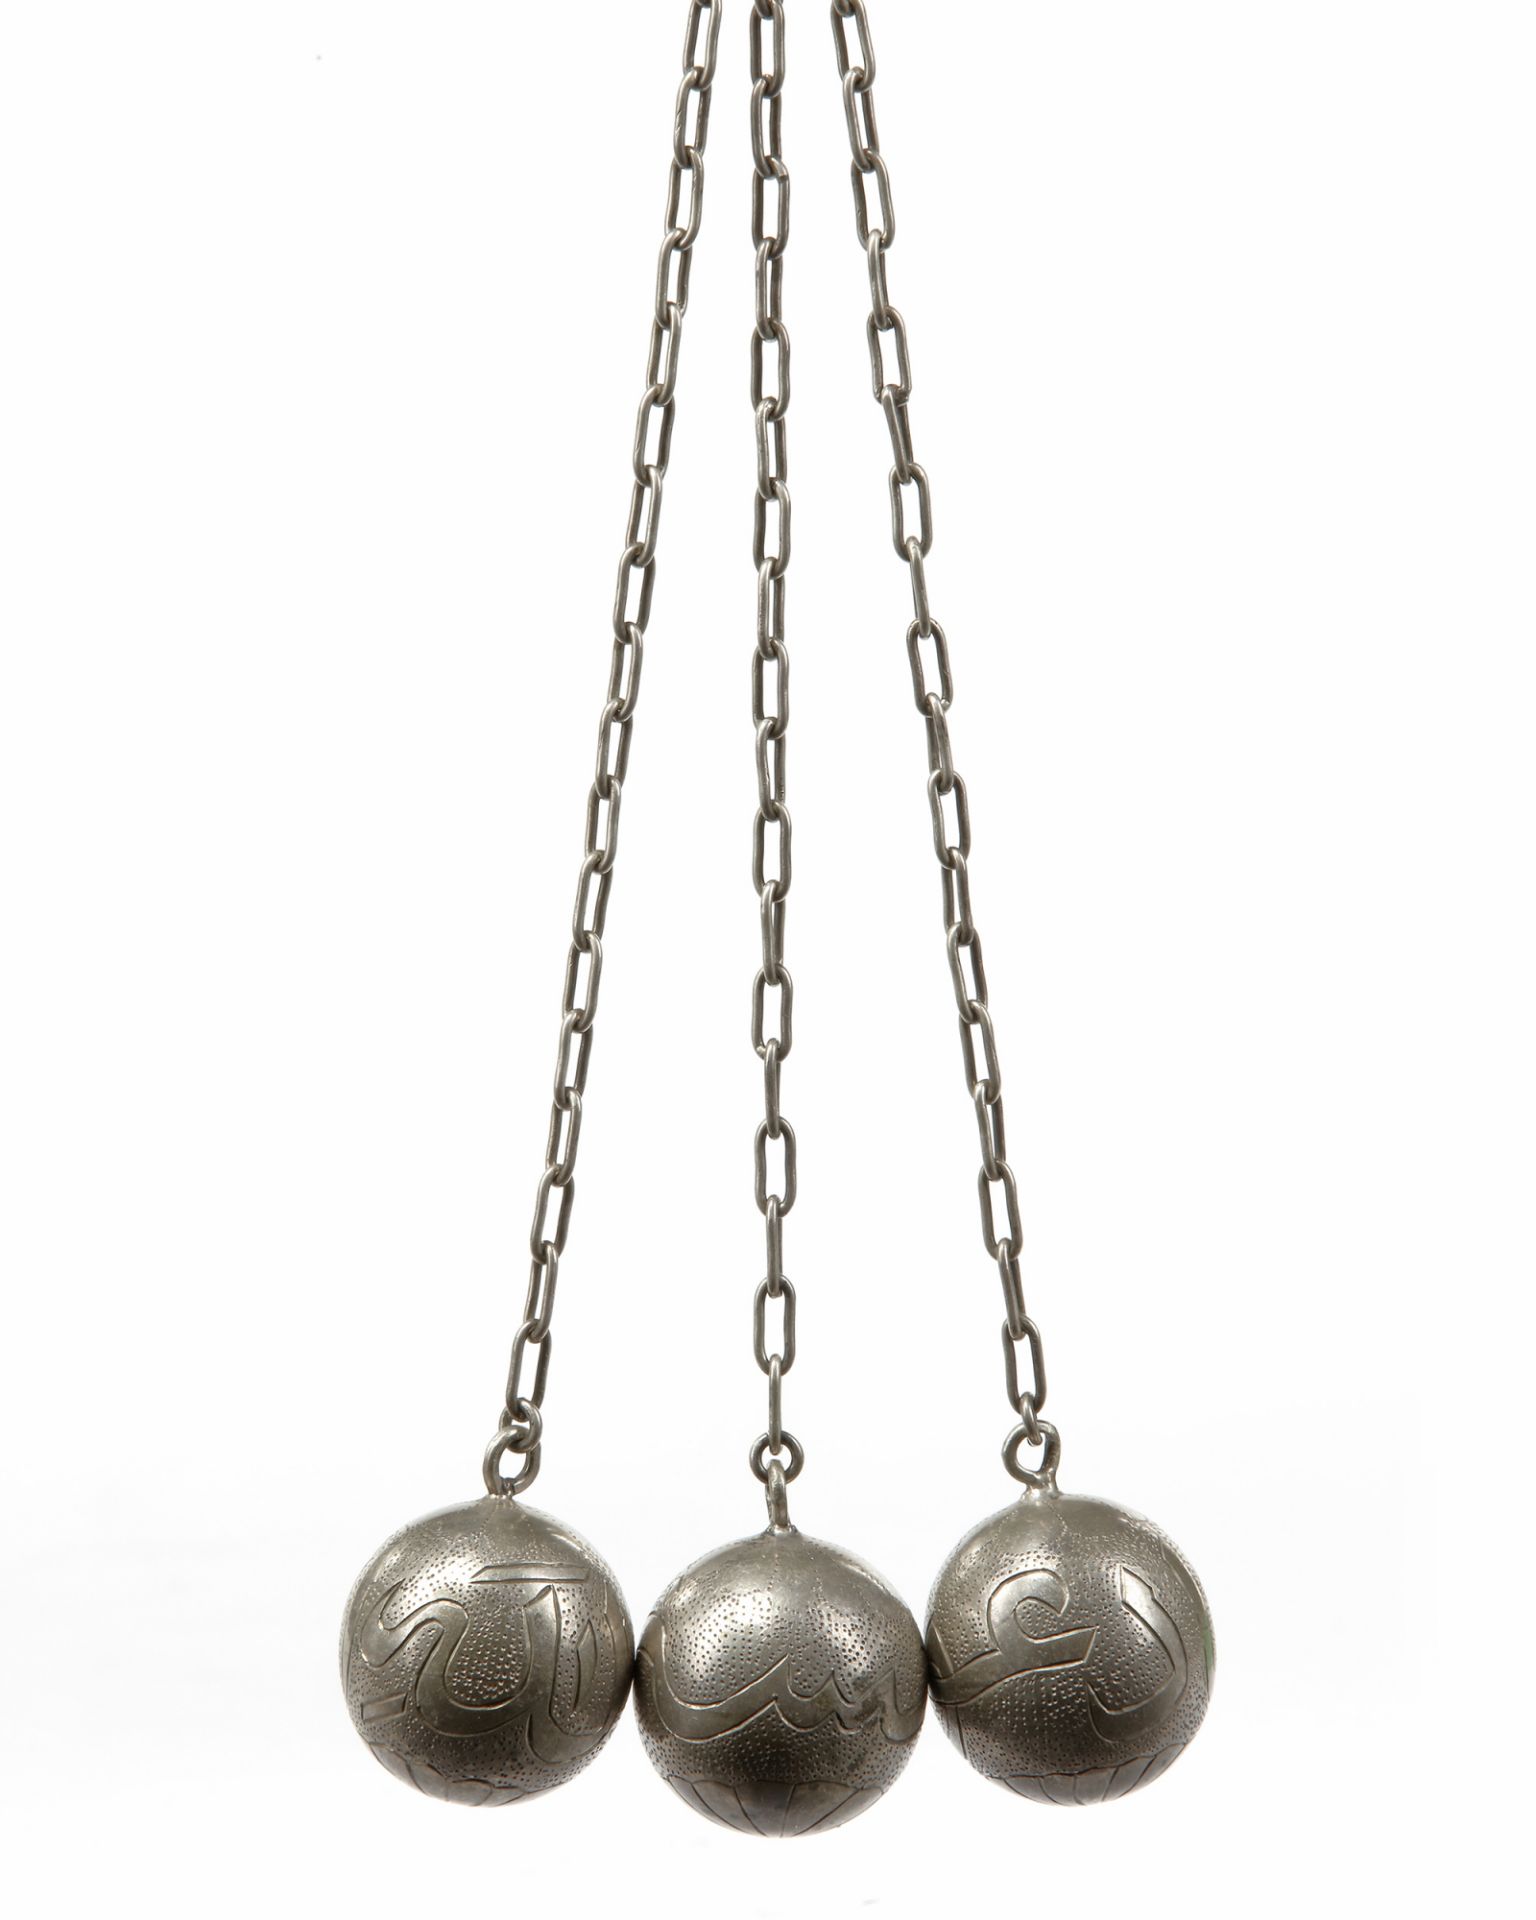 LARGE OTTOMAN SILVER PRAYER BEADS, LATE 19TH CENTURY - Image 5 of 12